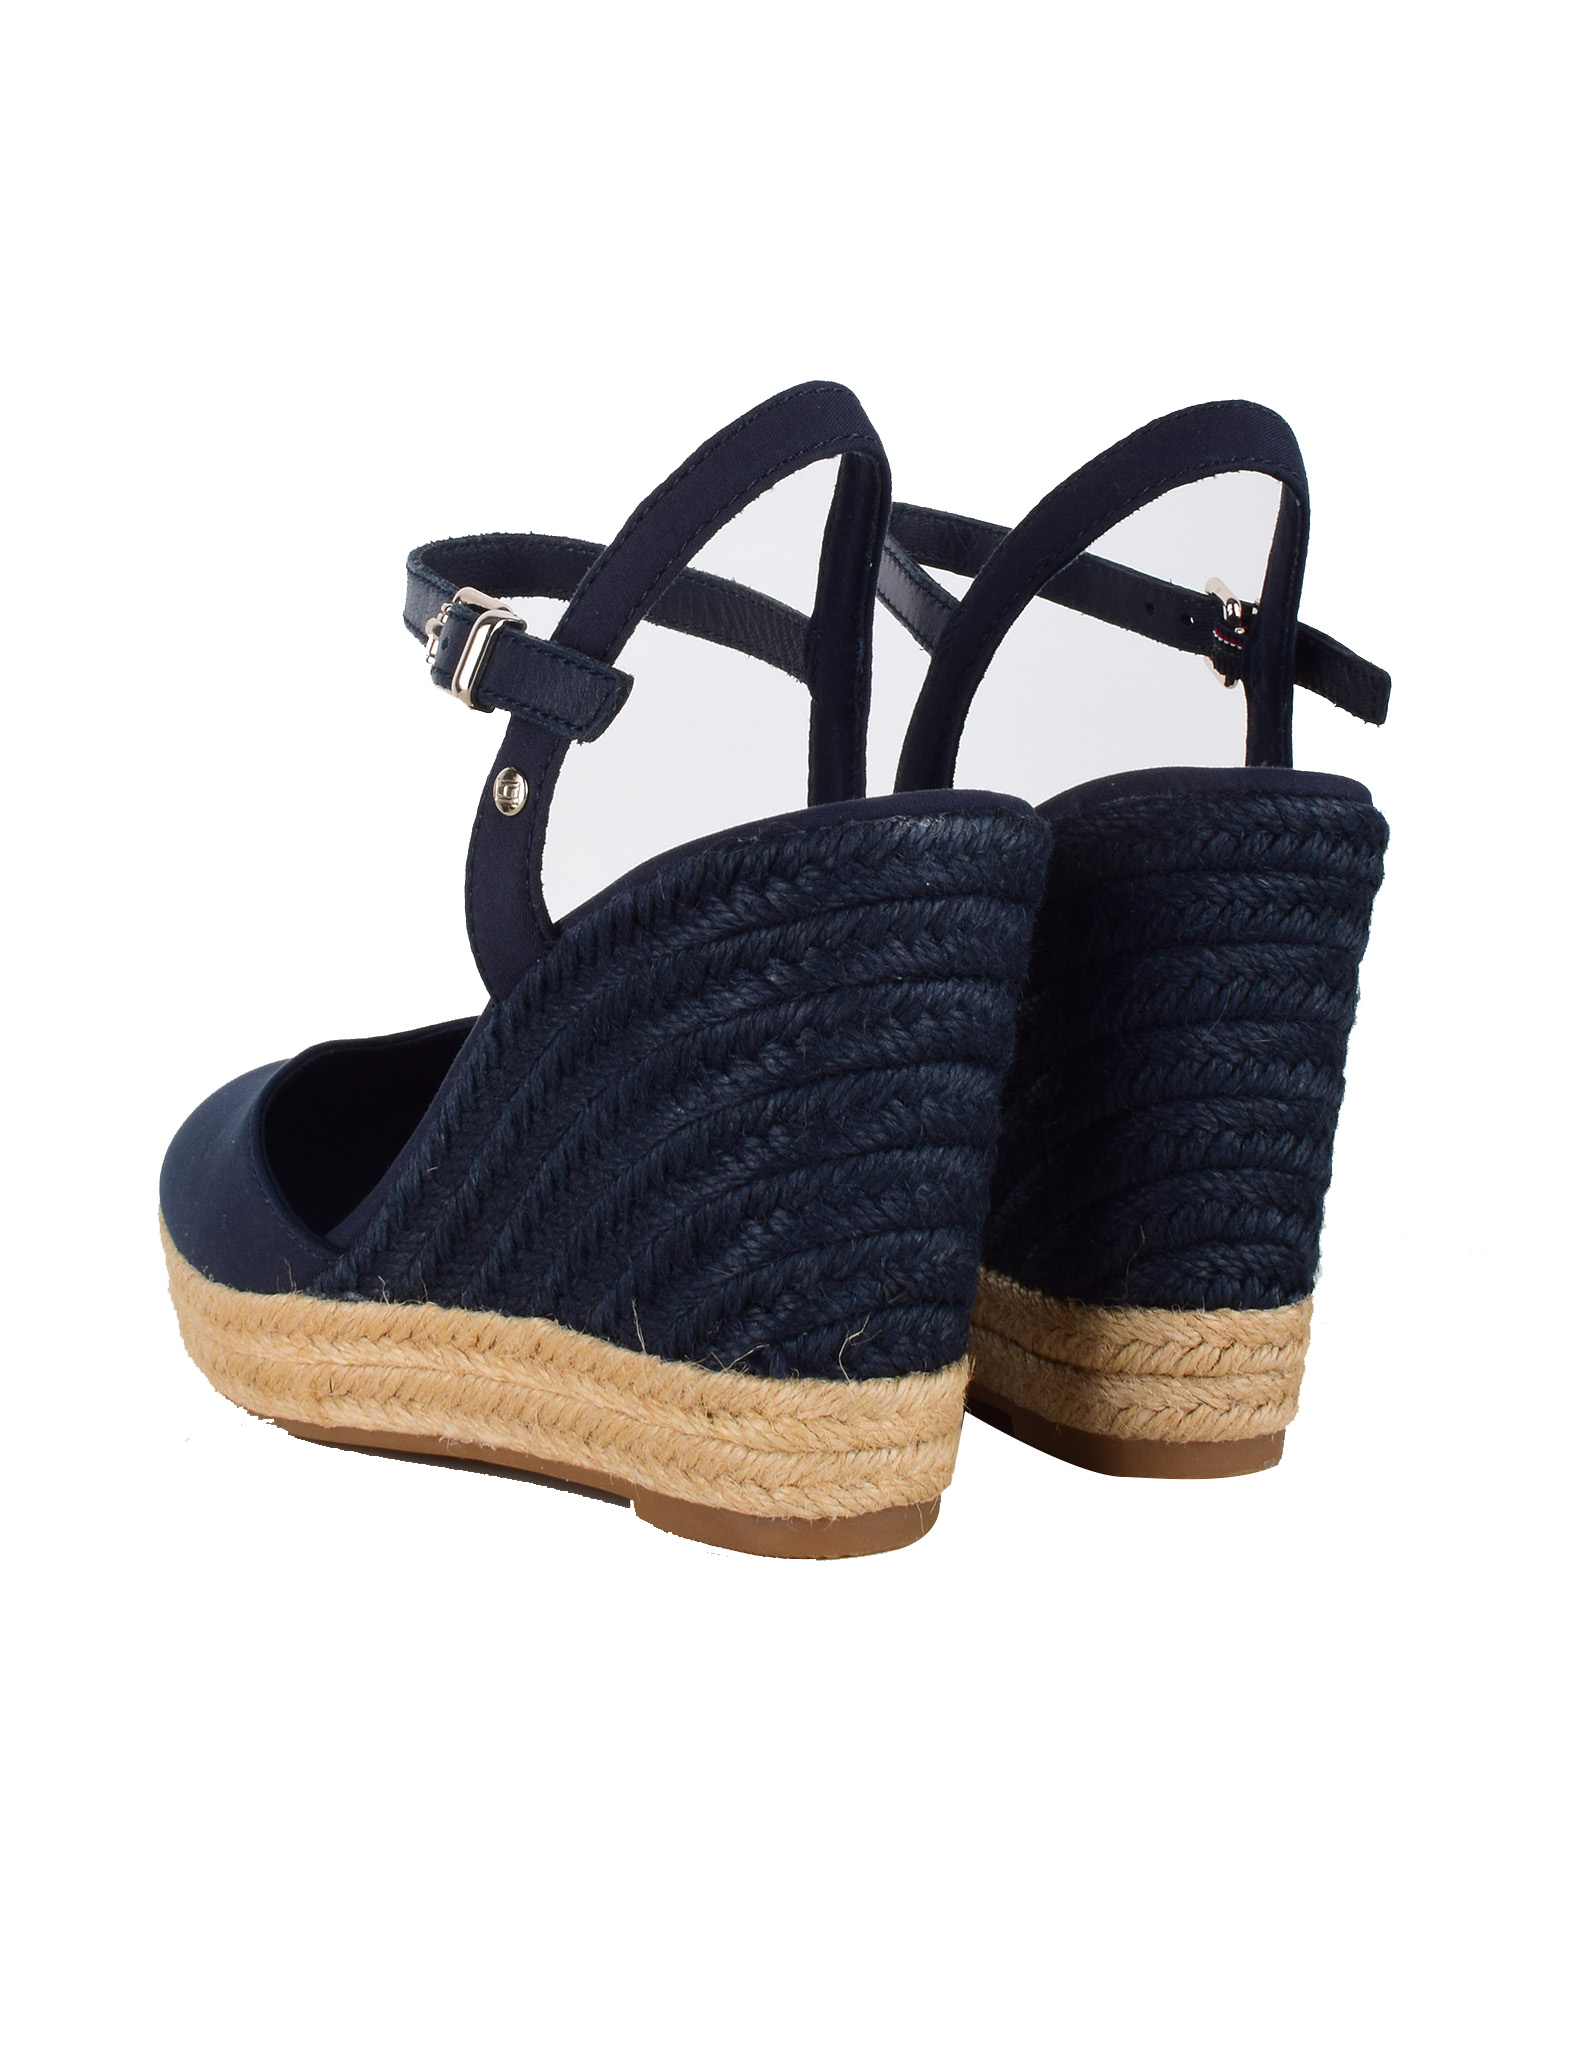 TOMMY HILFIGER WOMAN BASIC CLOSED TOE HIGH WEDGE 